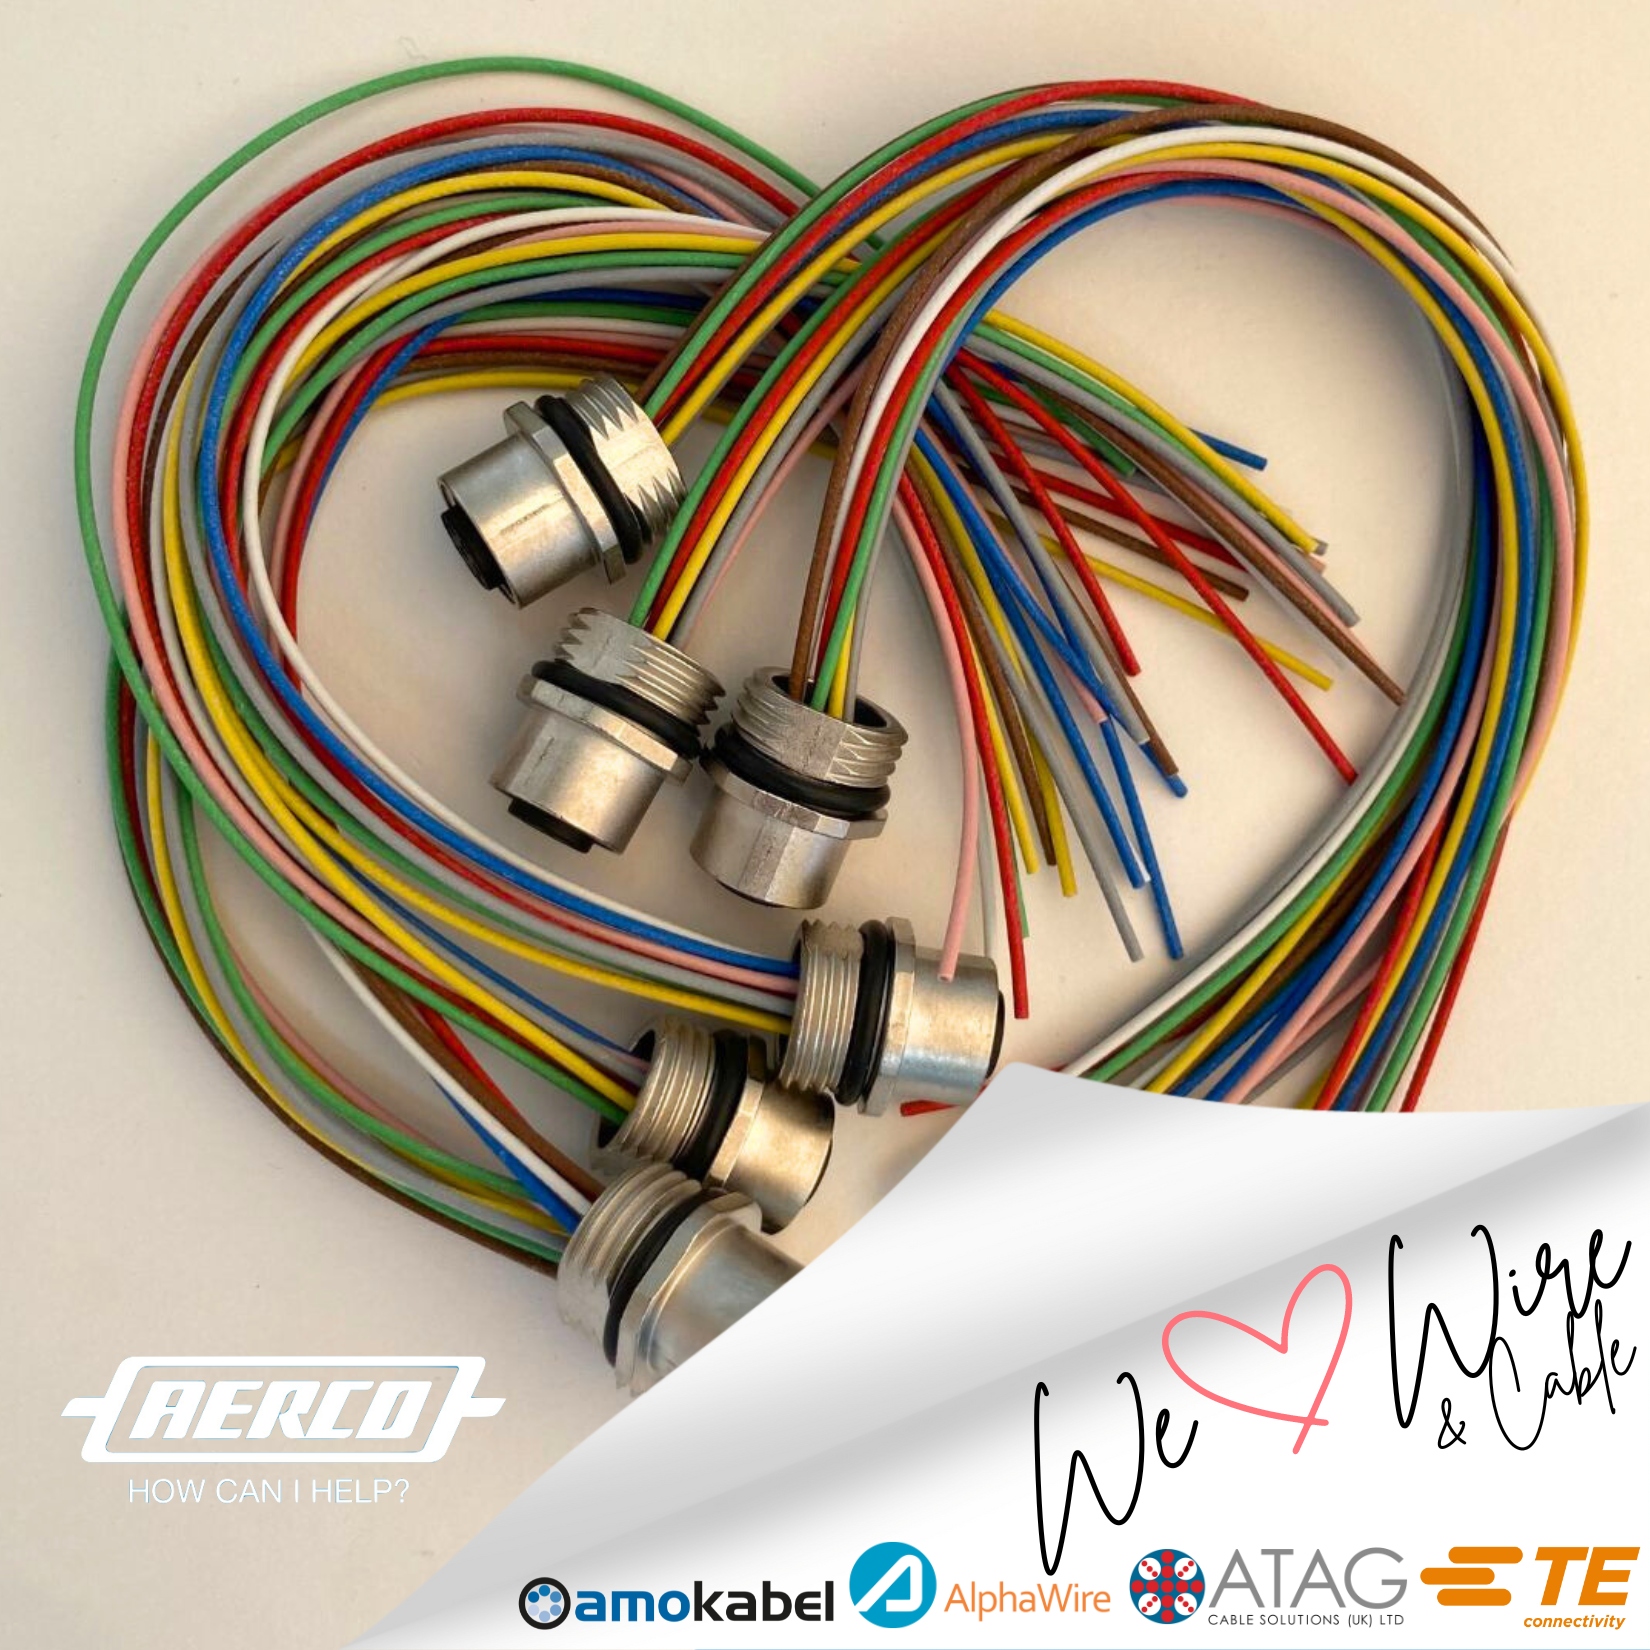 We Love Cable And Wire